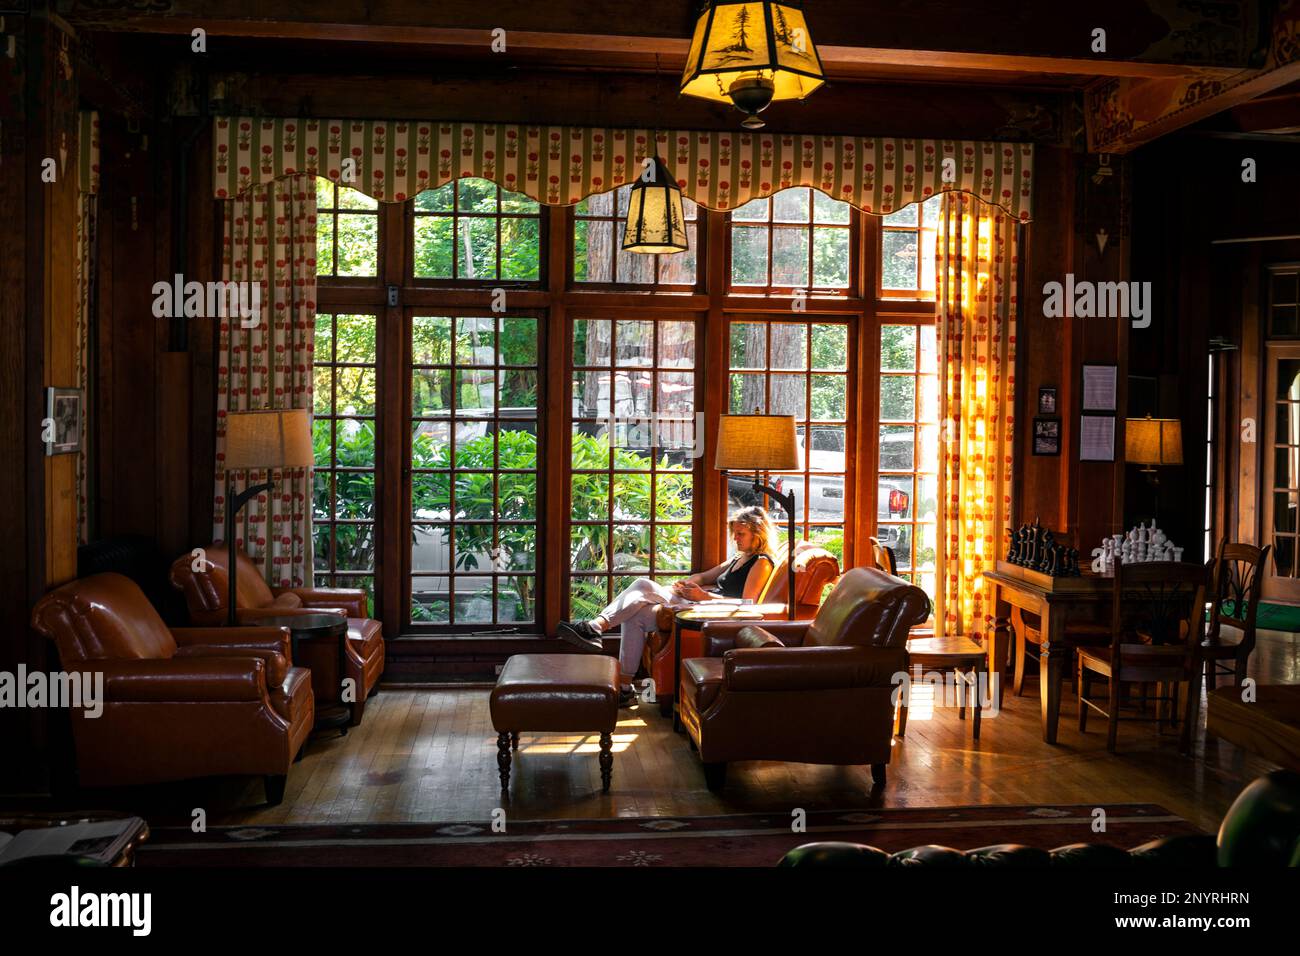 WA20981-00....WASHINGTON - Woman checking her phone in the loby of Lake Quinault Lodge. No MR. Stock Photo